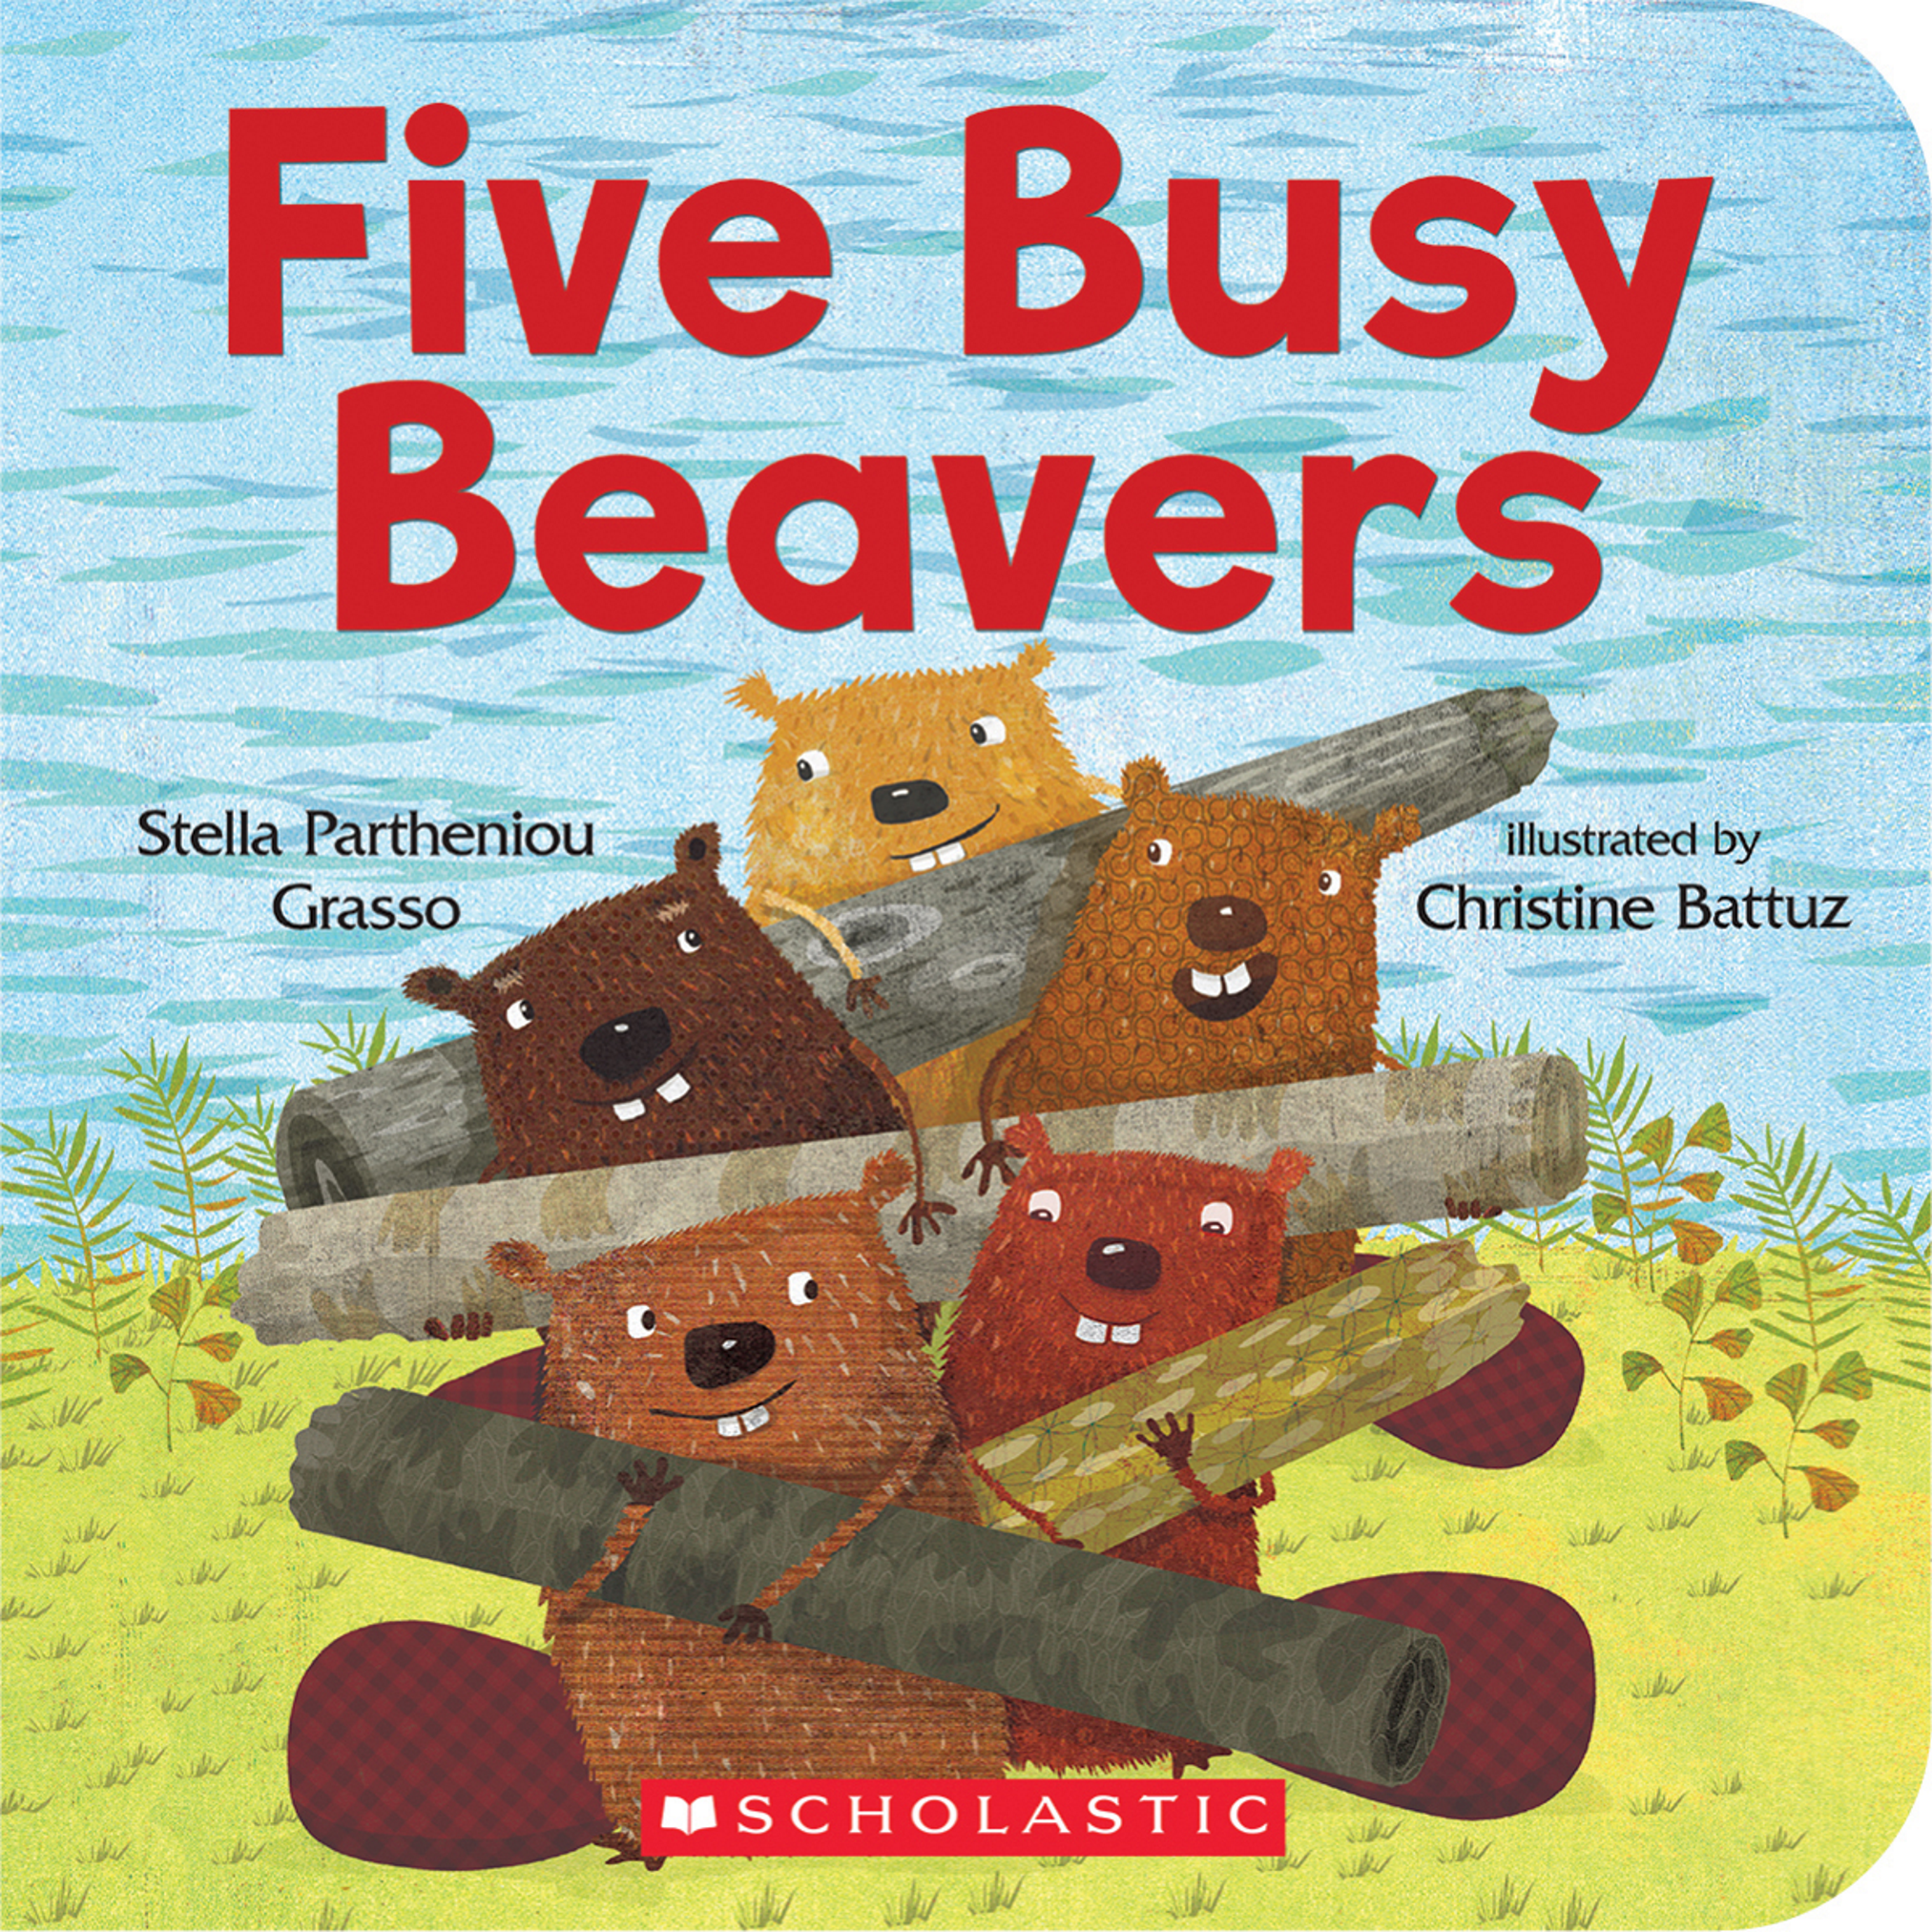 Five Busy Beavers (board book edition)